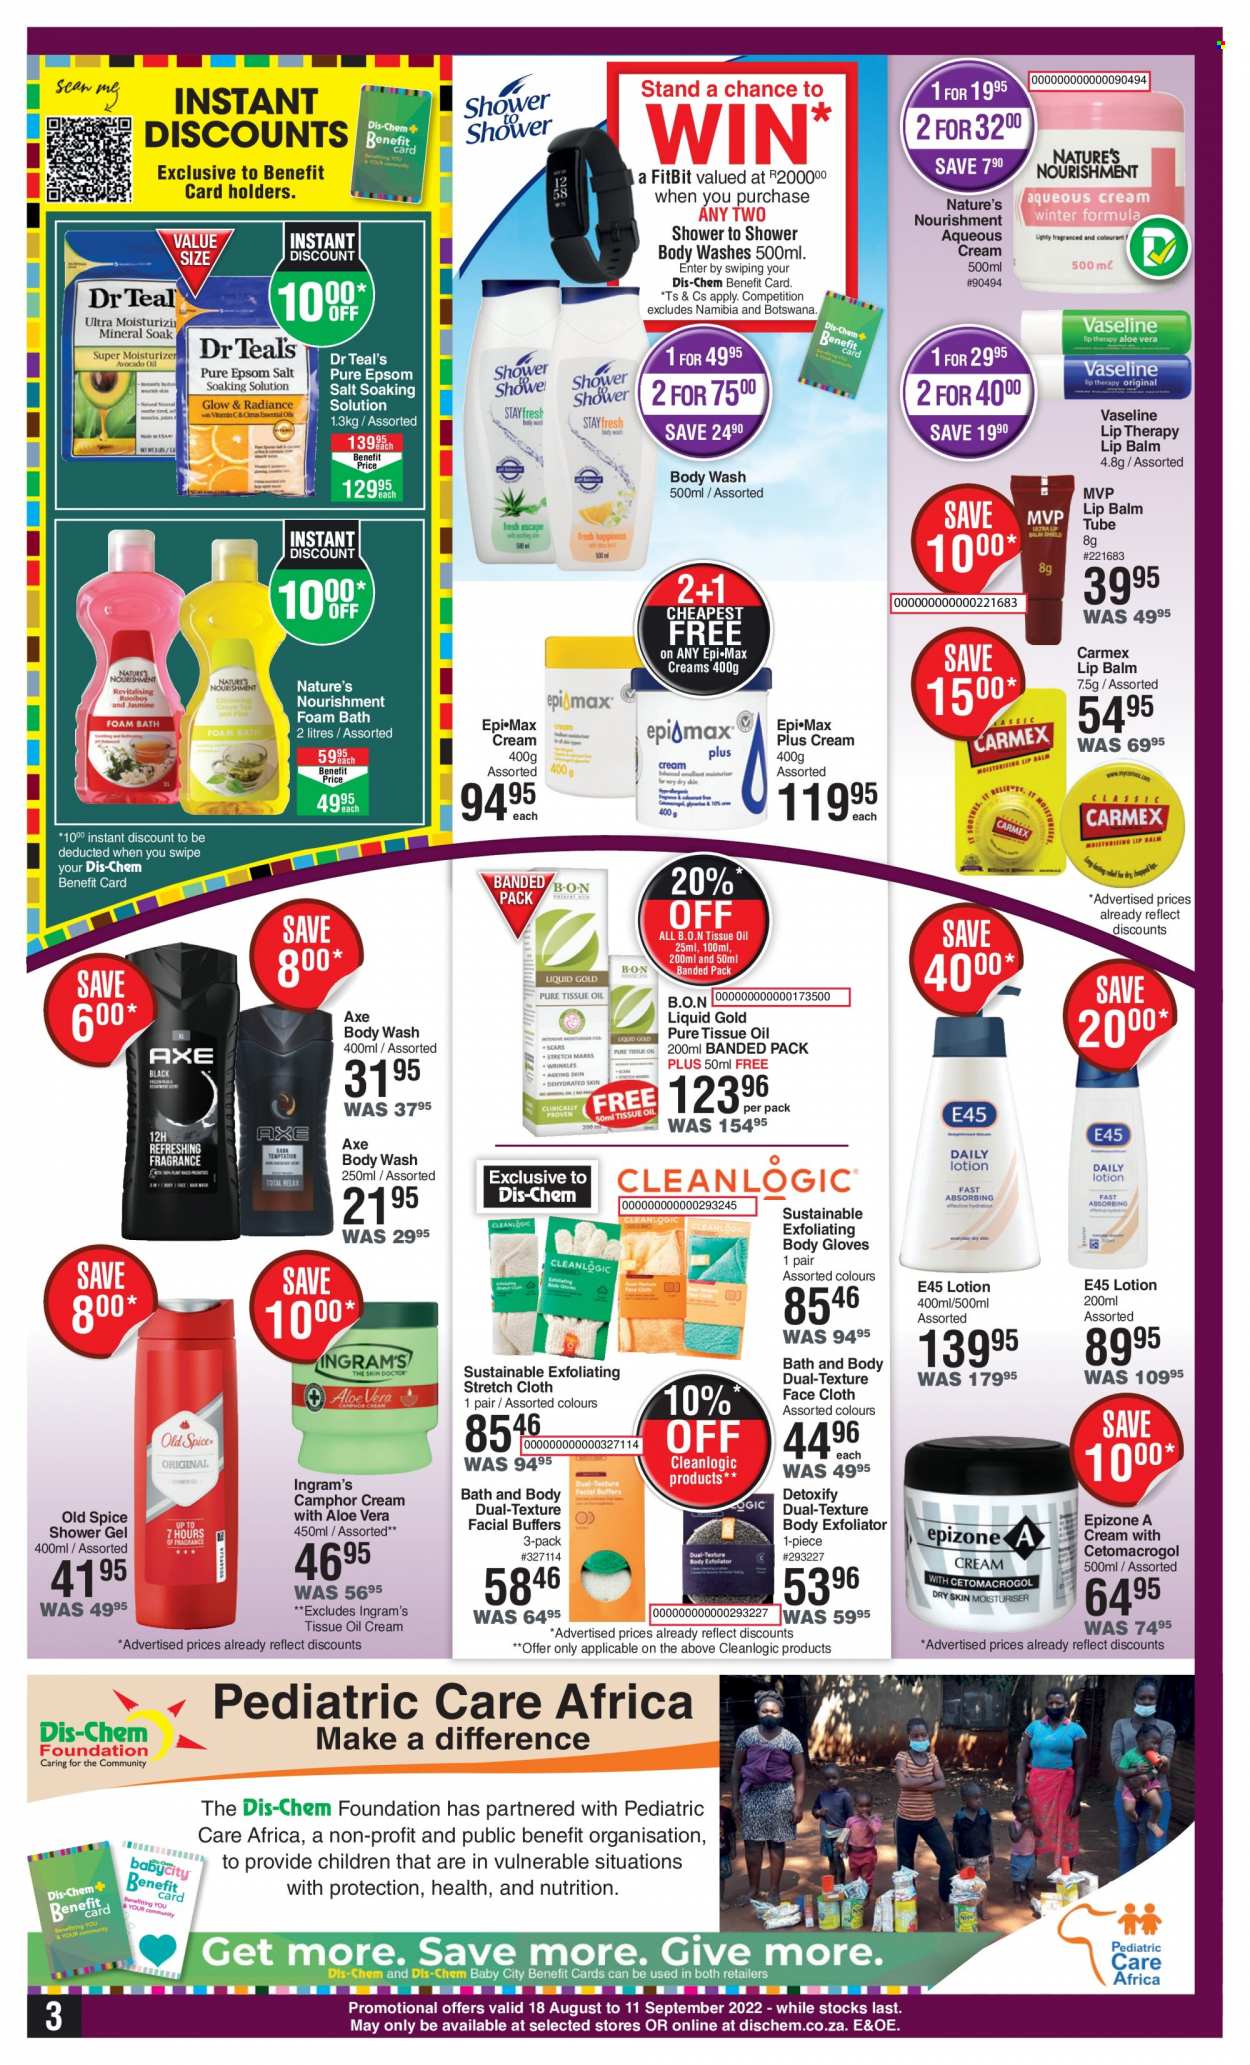 thumbnail - Dis-Chem catalogue  - 18/08/2022 - 11/09/2022 - Sales products - Epi-Max, tissues, body wash, shower gel, Old Spice, bath foam, Vaseline, lip balm, E45, body lotion, Axe. Page 3.